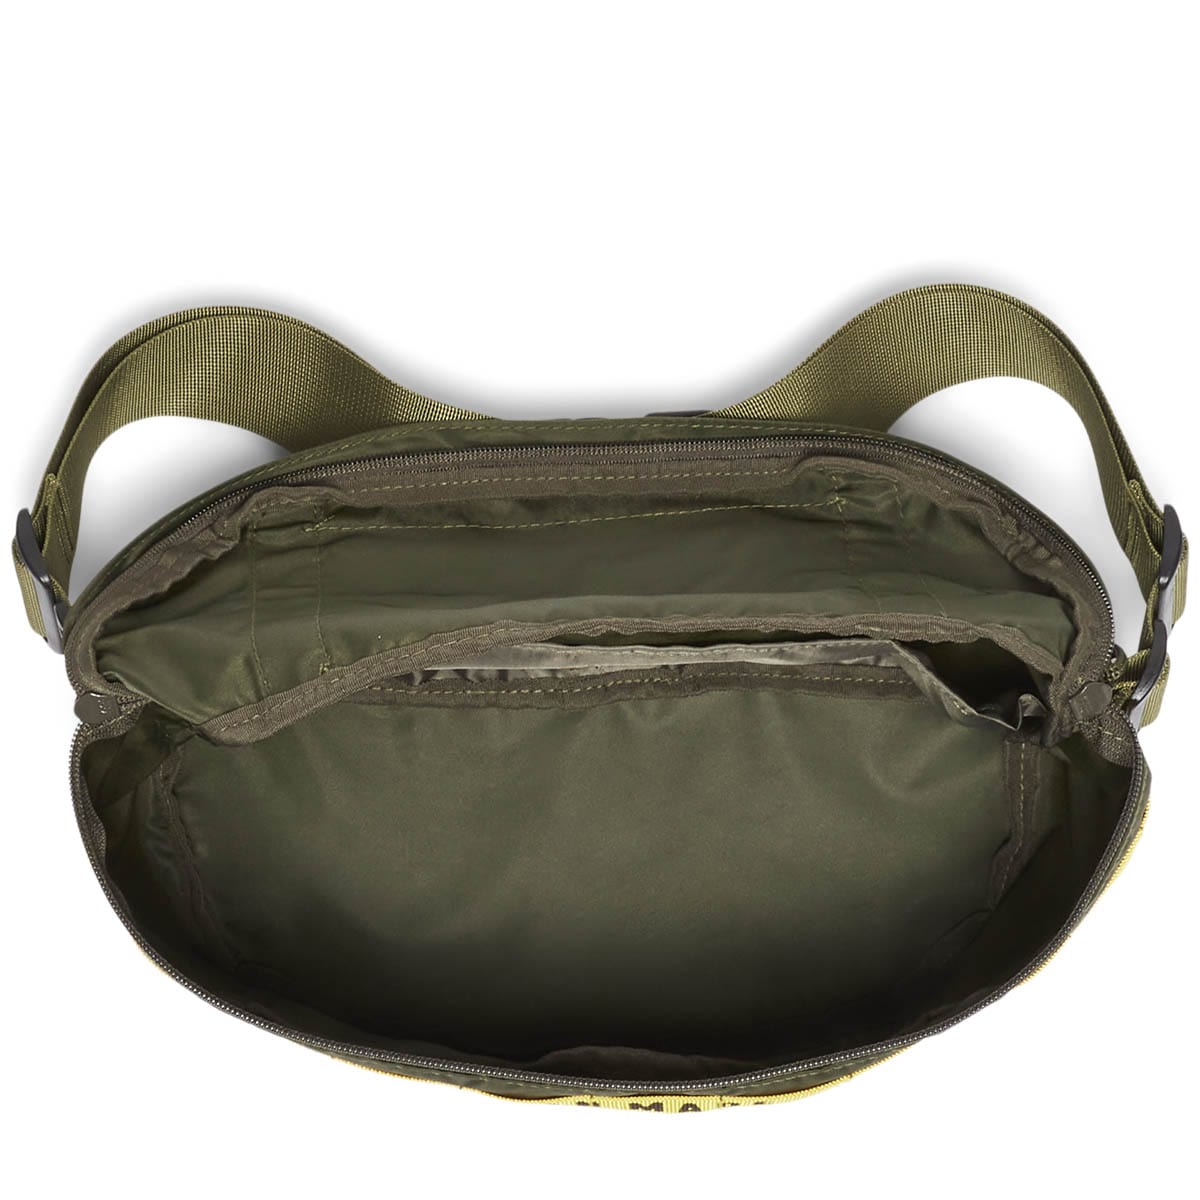 Human Made Bags & Accessories OLIVE DRAB / O/S MILITARY WAIST BAG